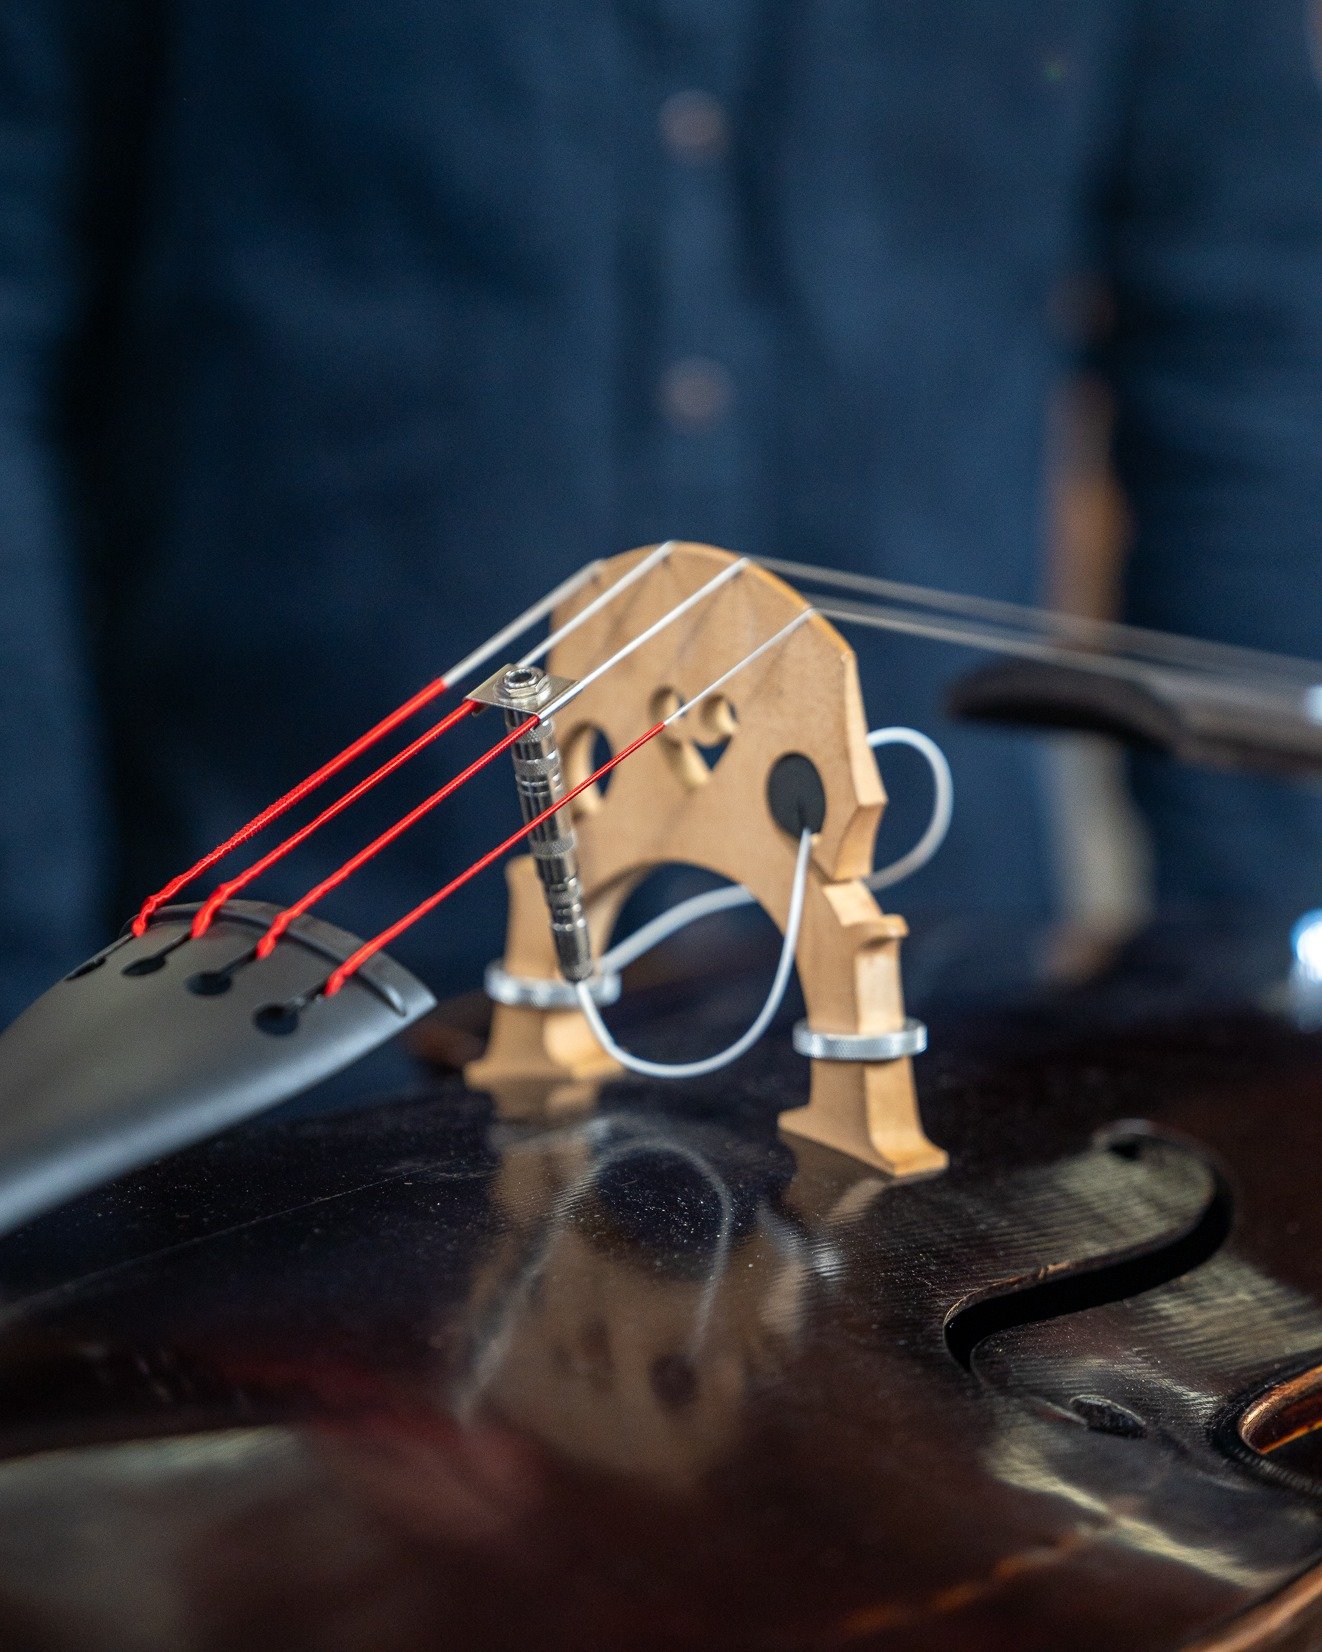 Playing the double basses doesn't need to be hard work! If you want to learn three essential elements of bass set-up, check out our latest interview with Neal of @hepplestondoublebasses which is freely available at https://discoverdoublebass.com/

#d